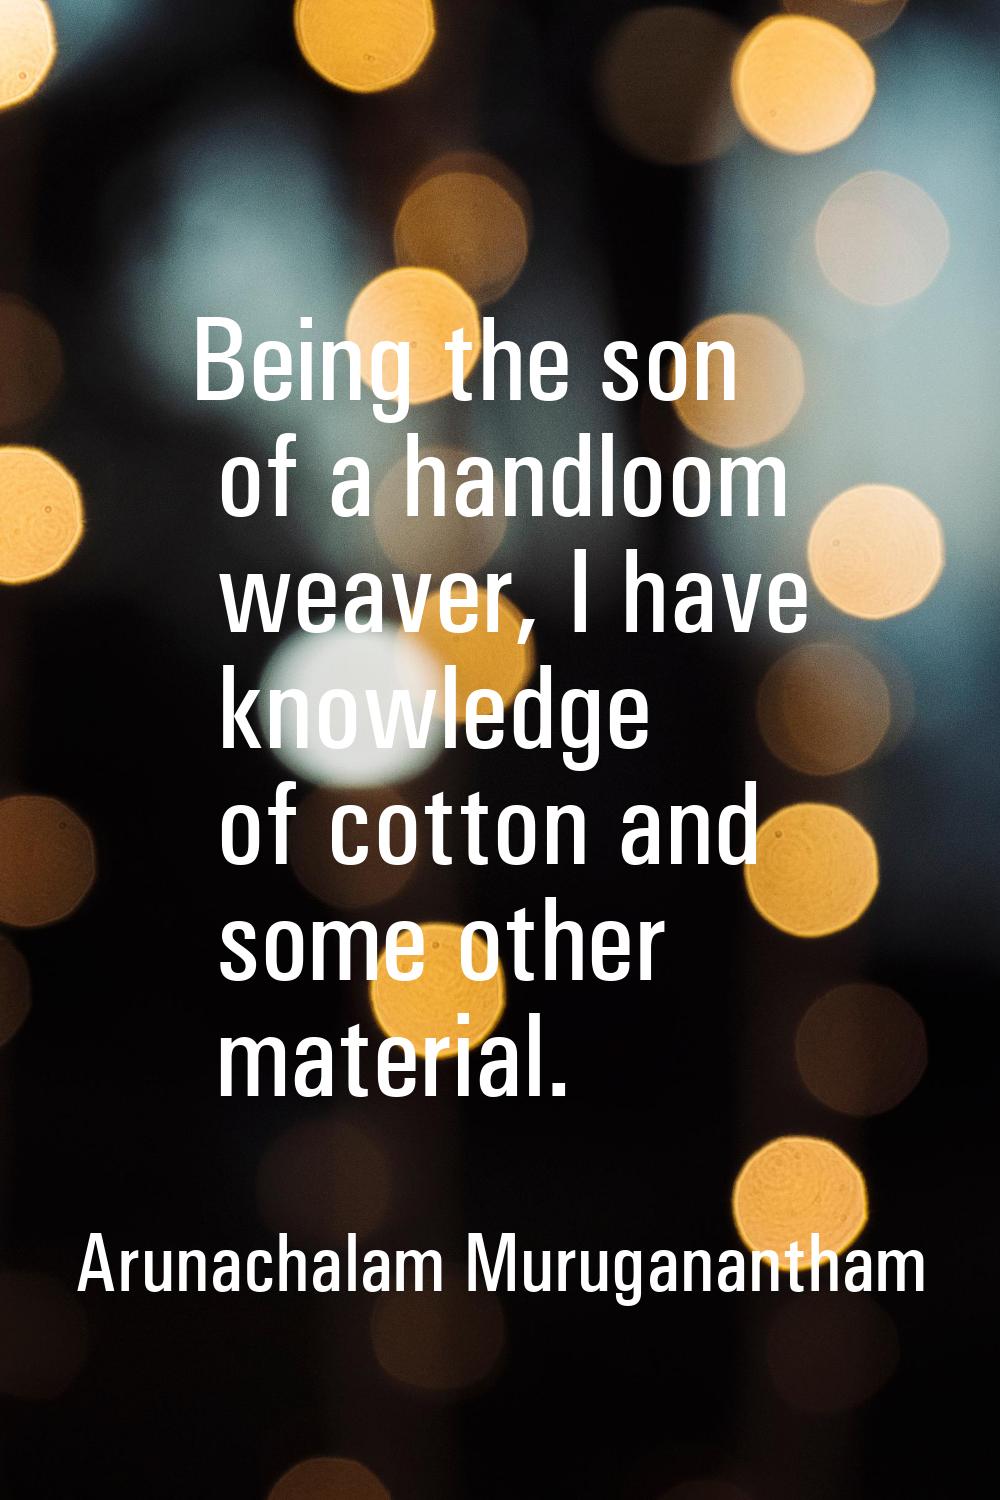 Being the son of a handloom weaver, I have knowledge of cotton and some other material.